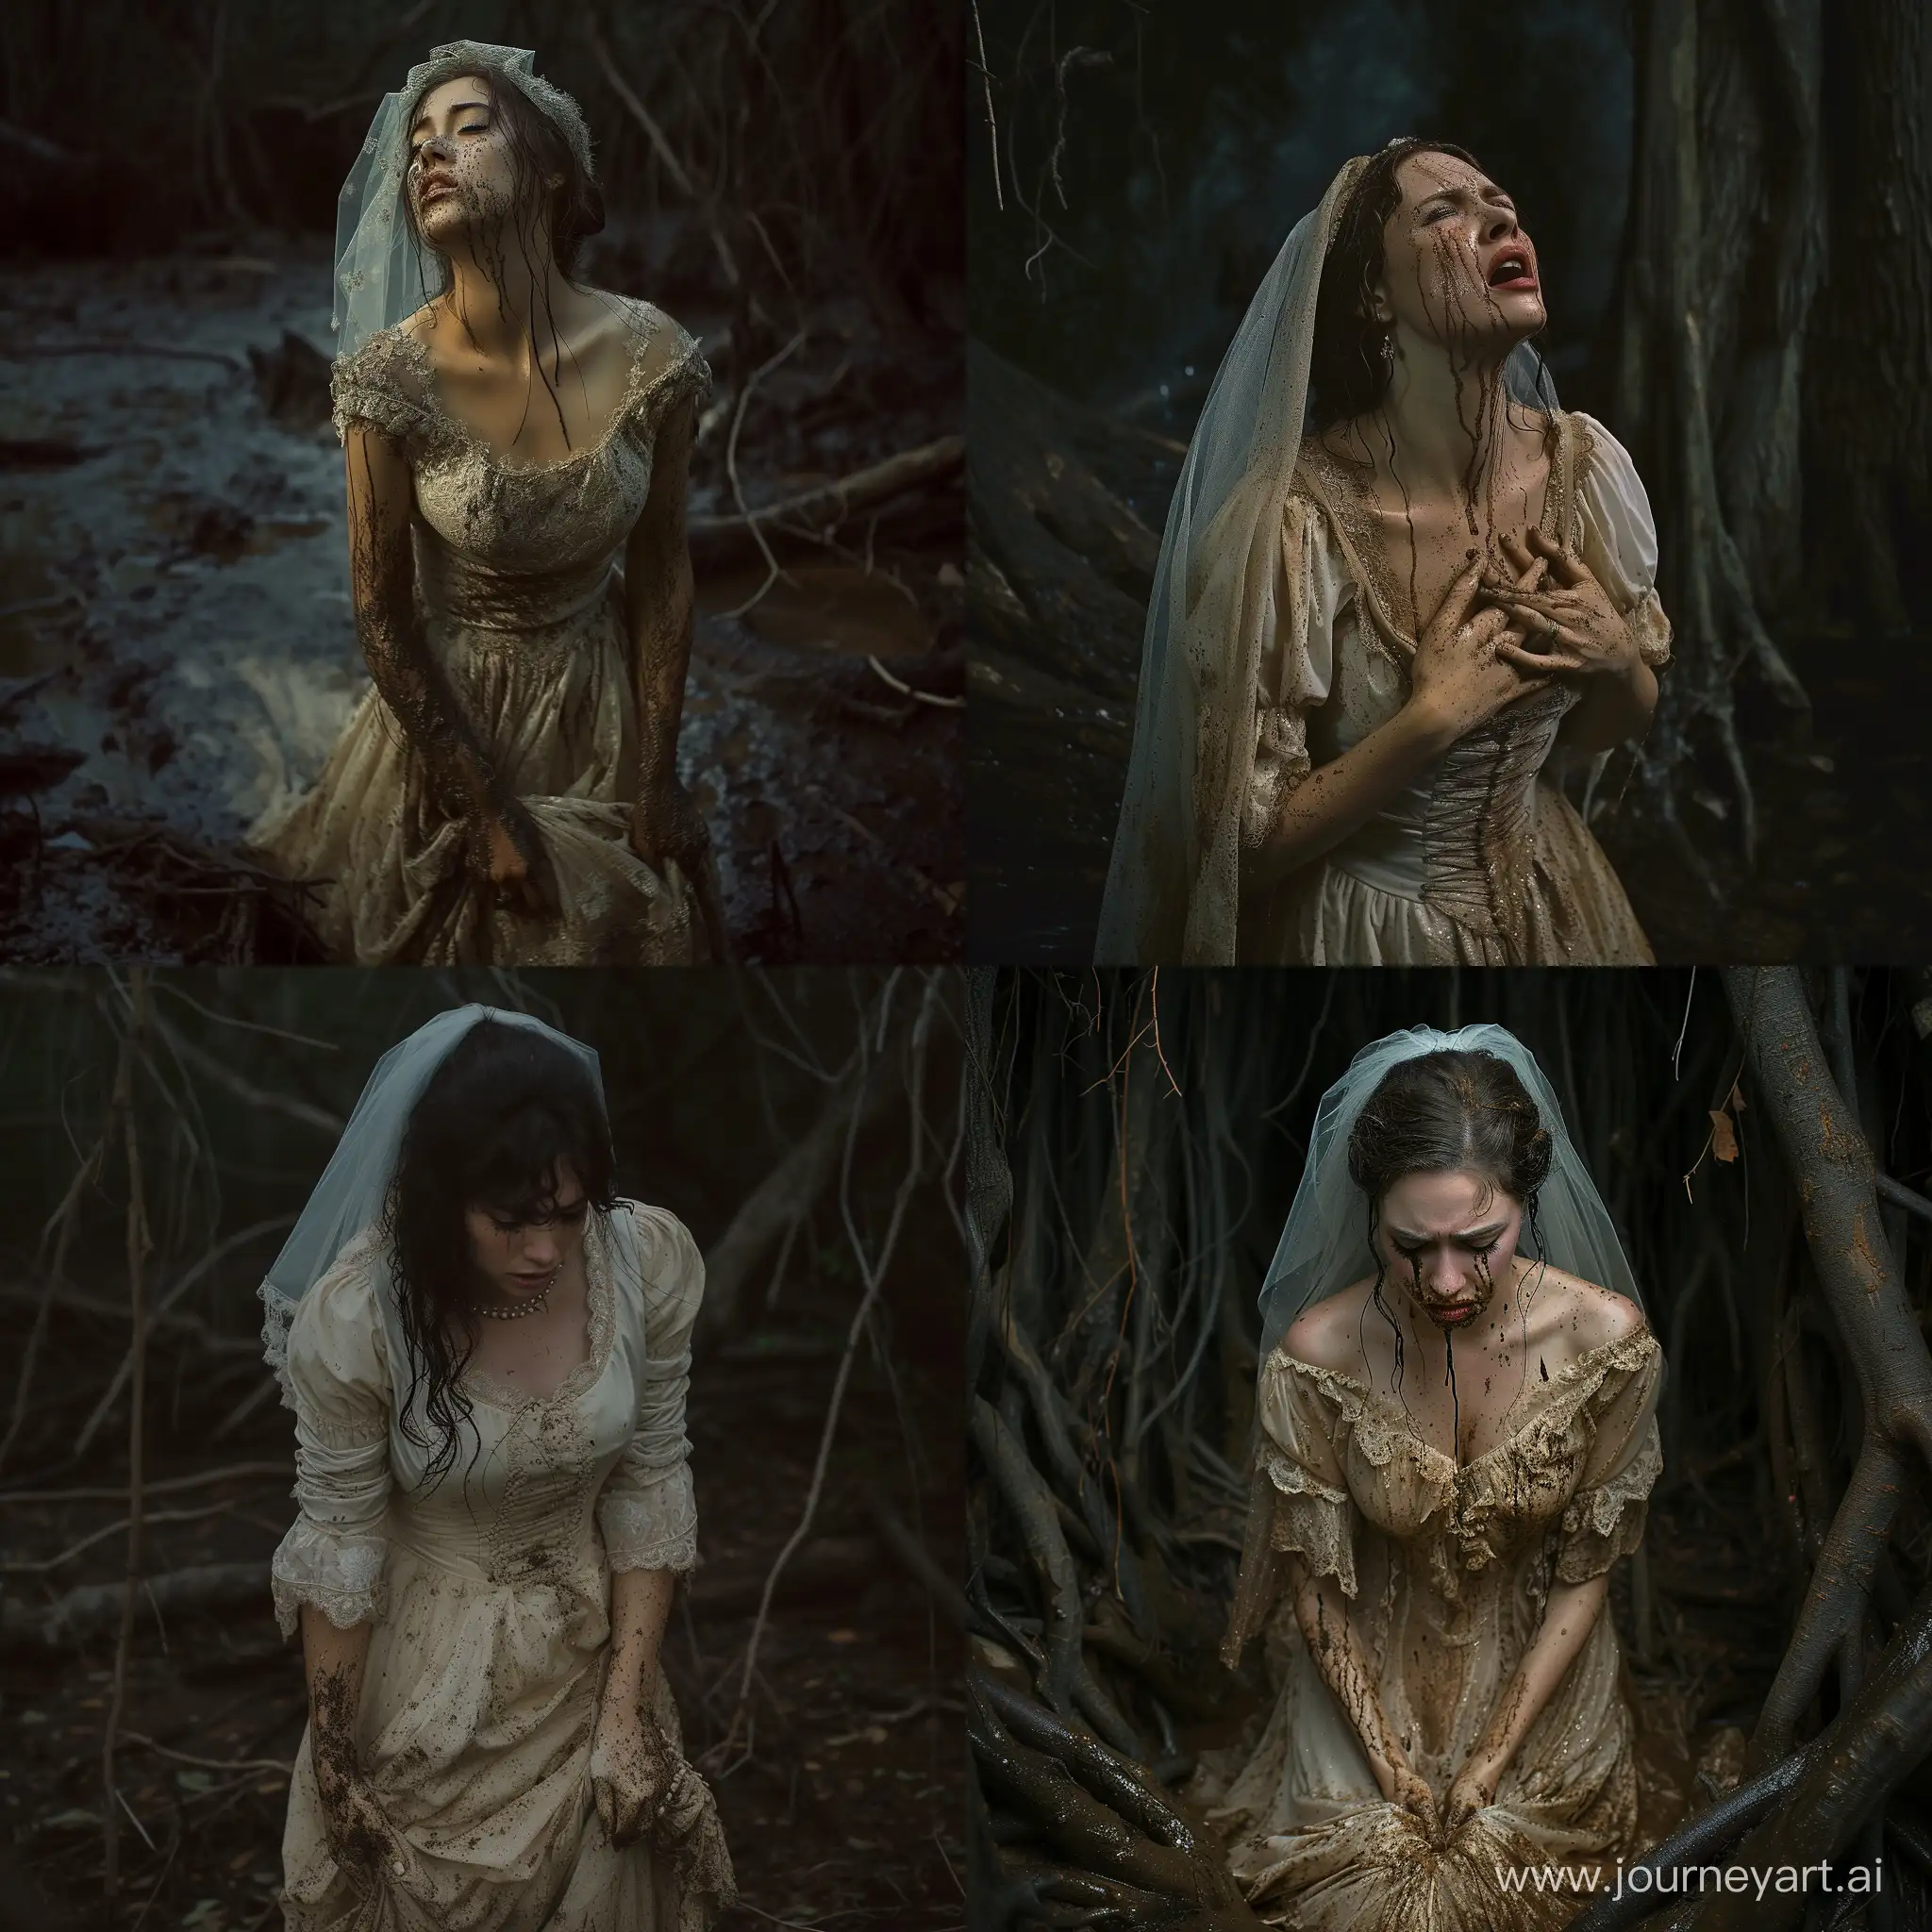 Distressed-Bride-Weeps-in-Enchanted-Forest